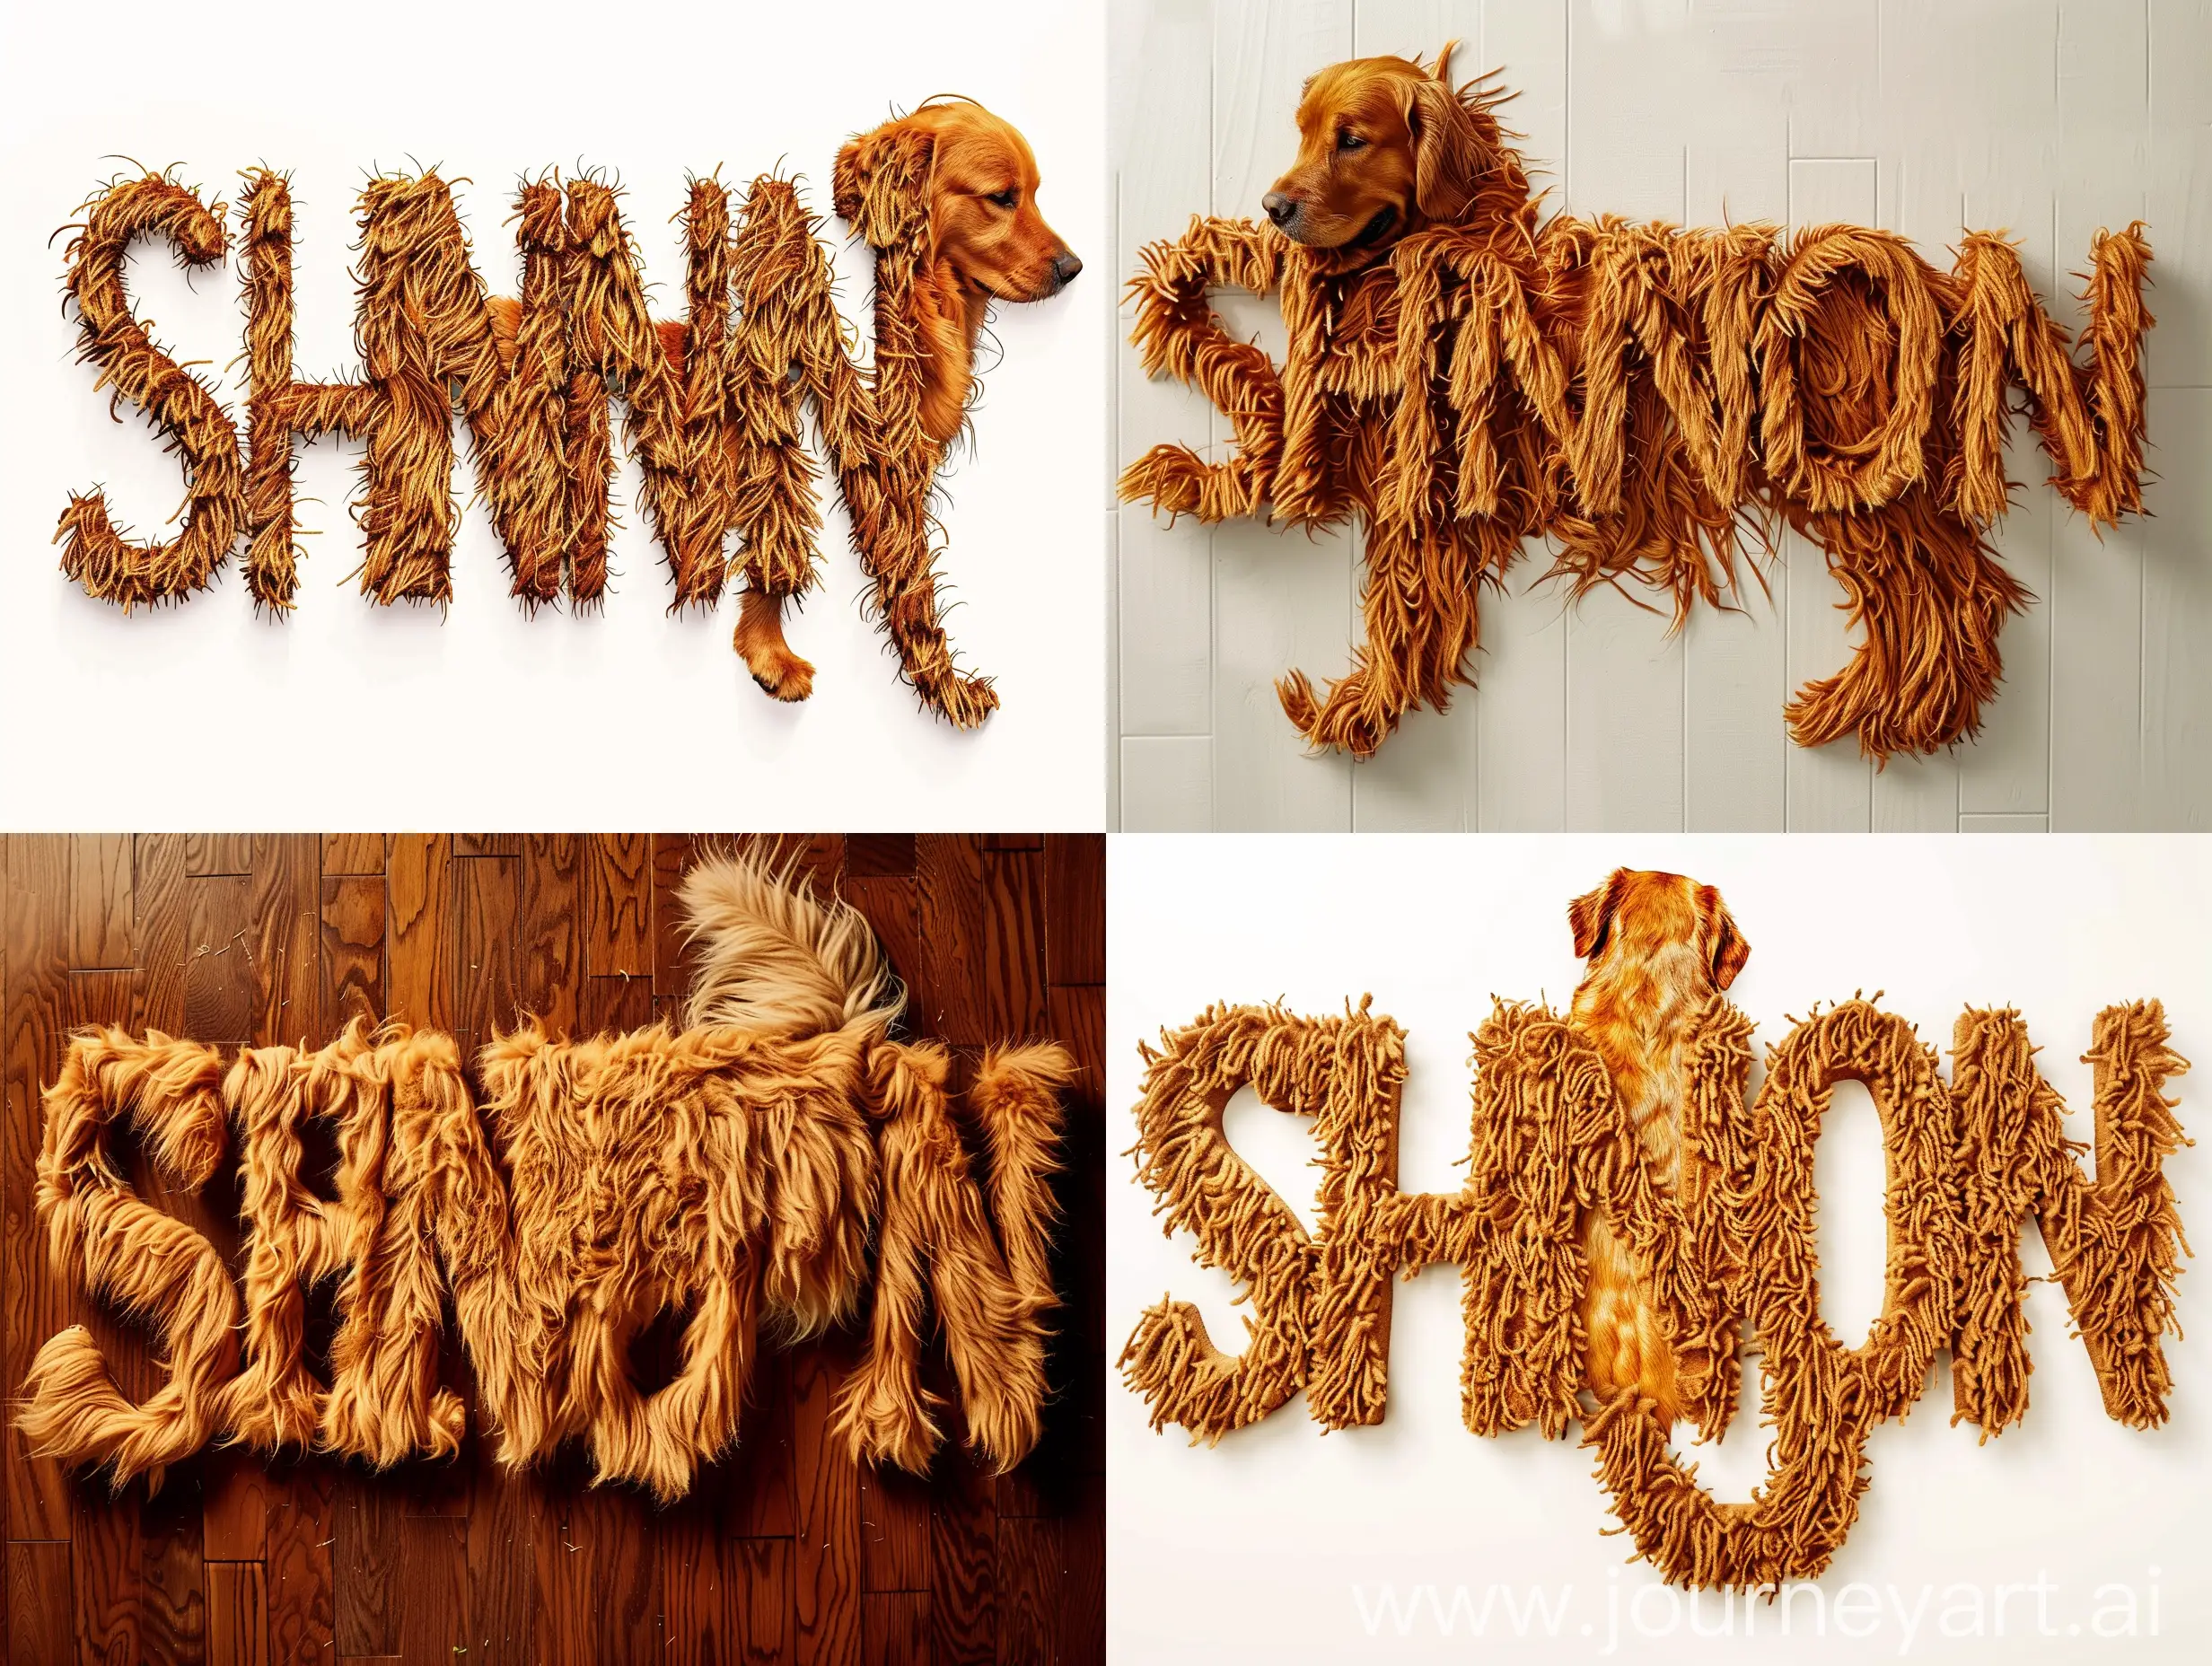 a large image of word "SHANNON" attractive shape of golden retriever dog's fur font